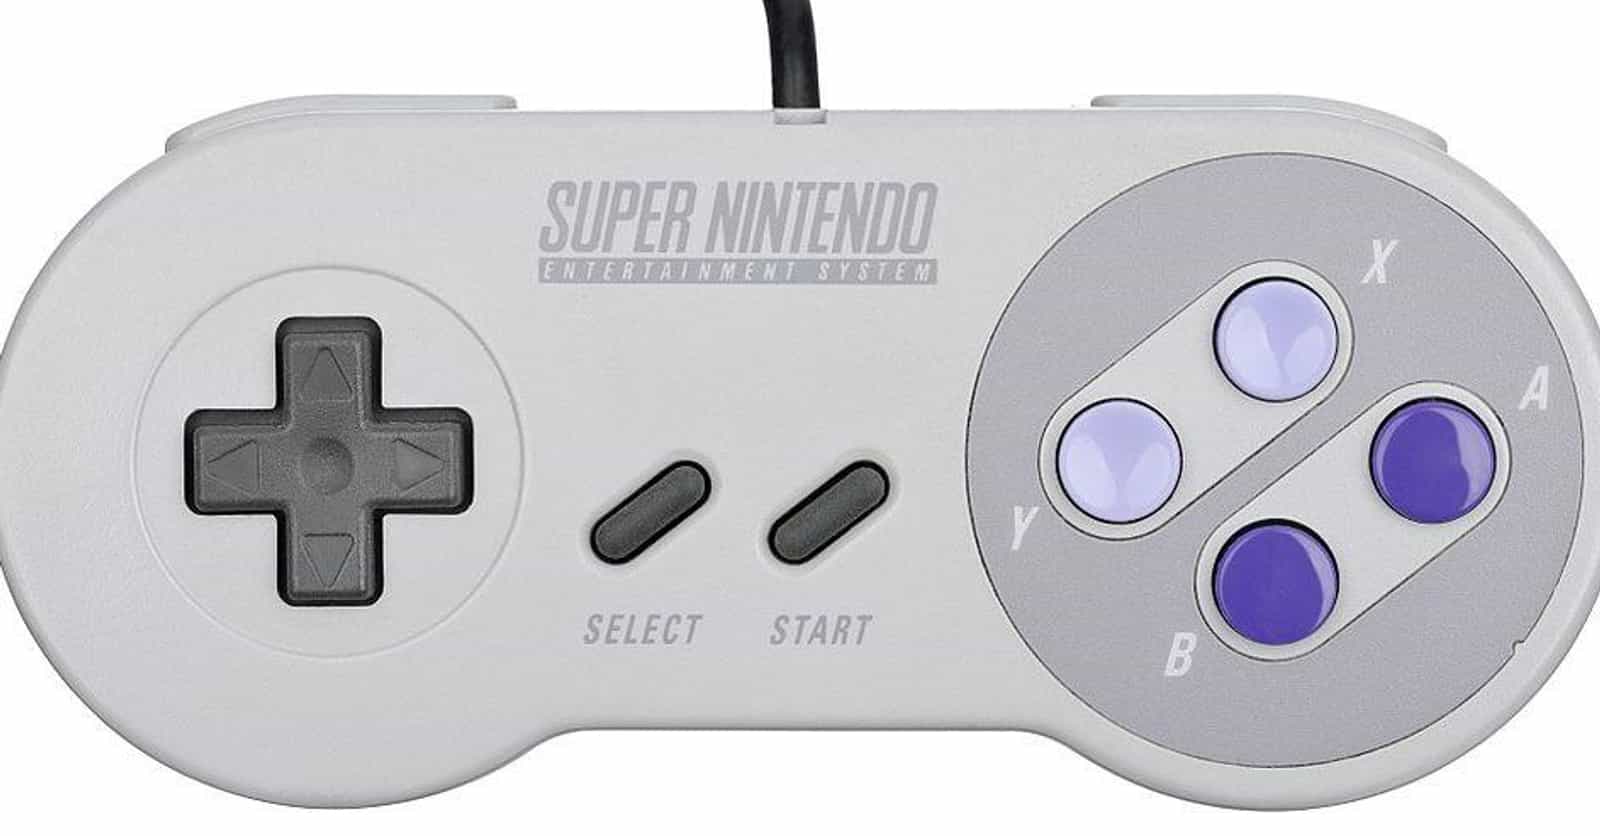 Why Do Video Game Controllers Have The D-Pad On The Left: A Quick History Of Video Game Controllers